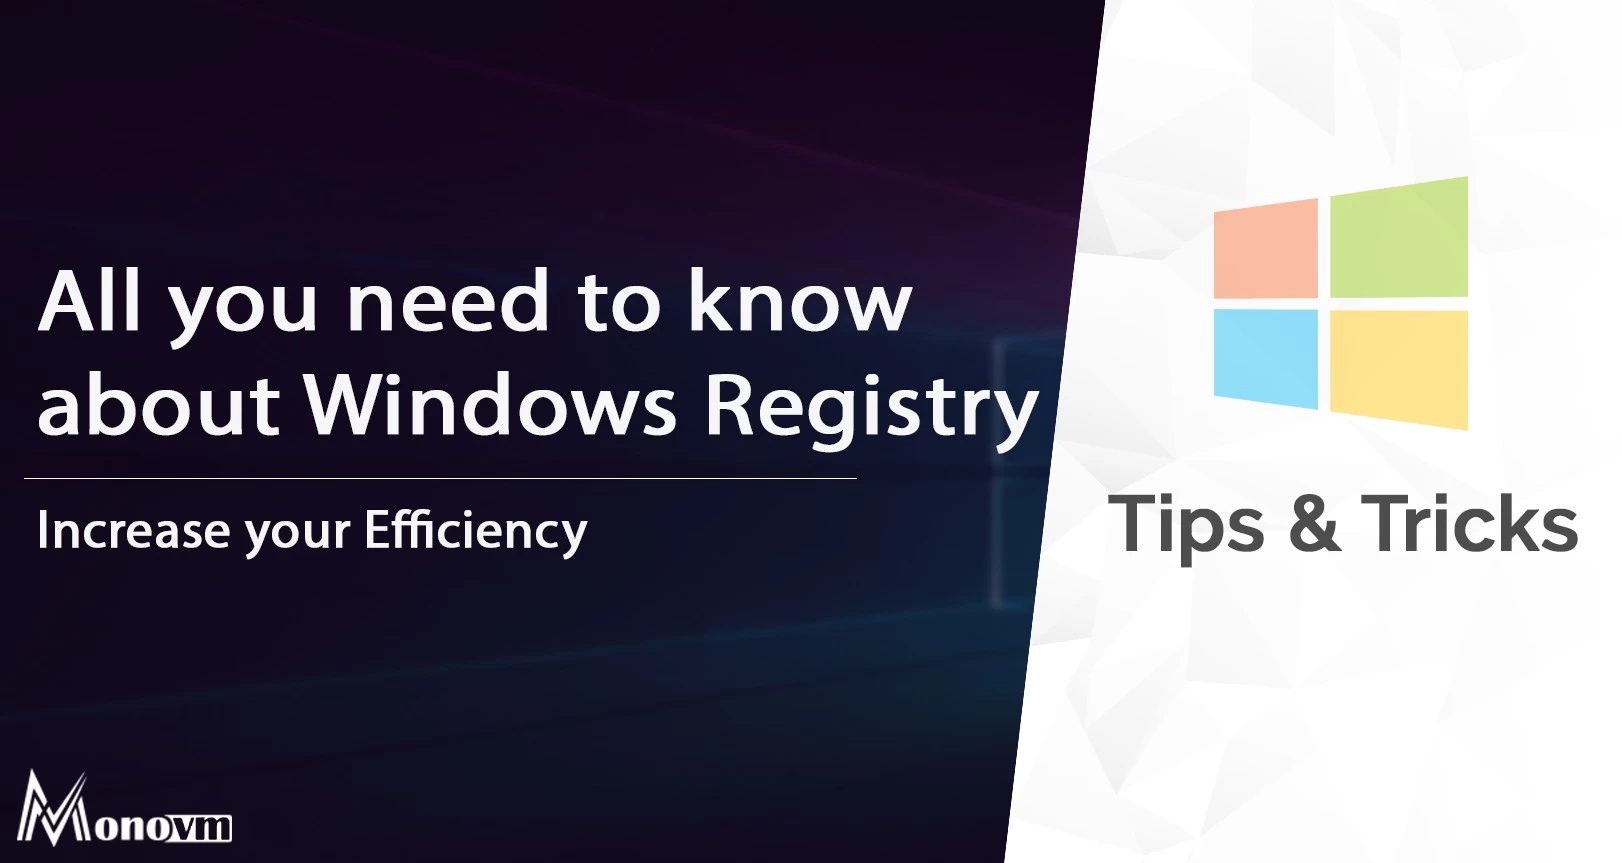 Windows Registry: All you need to know